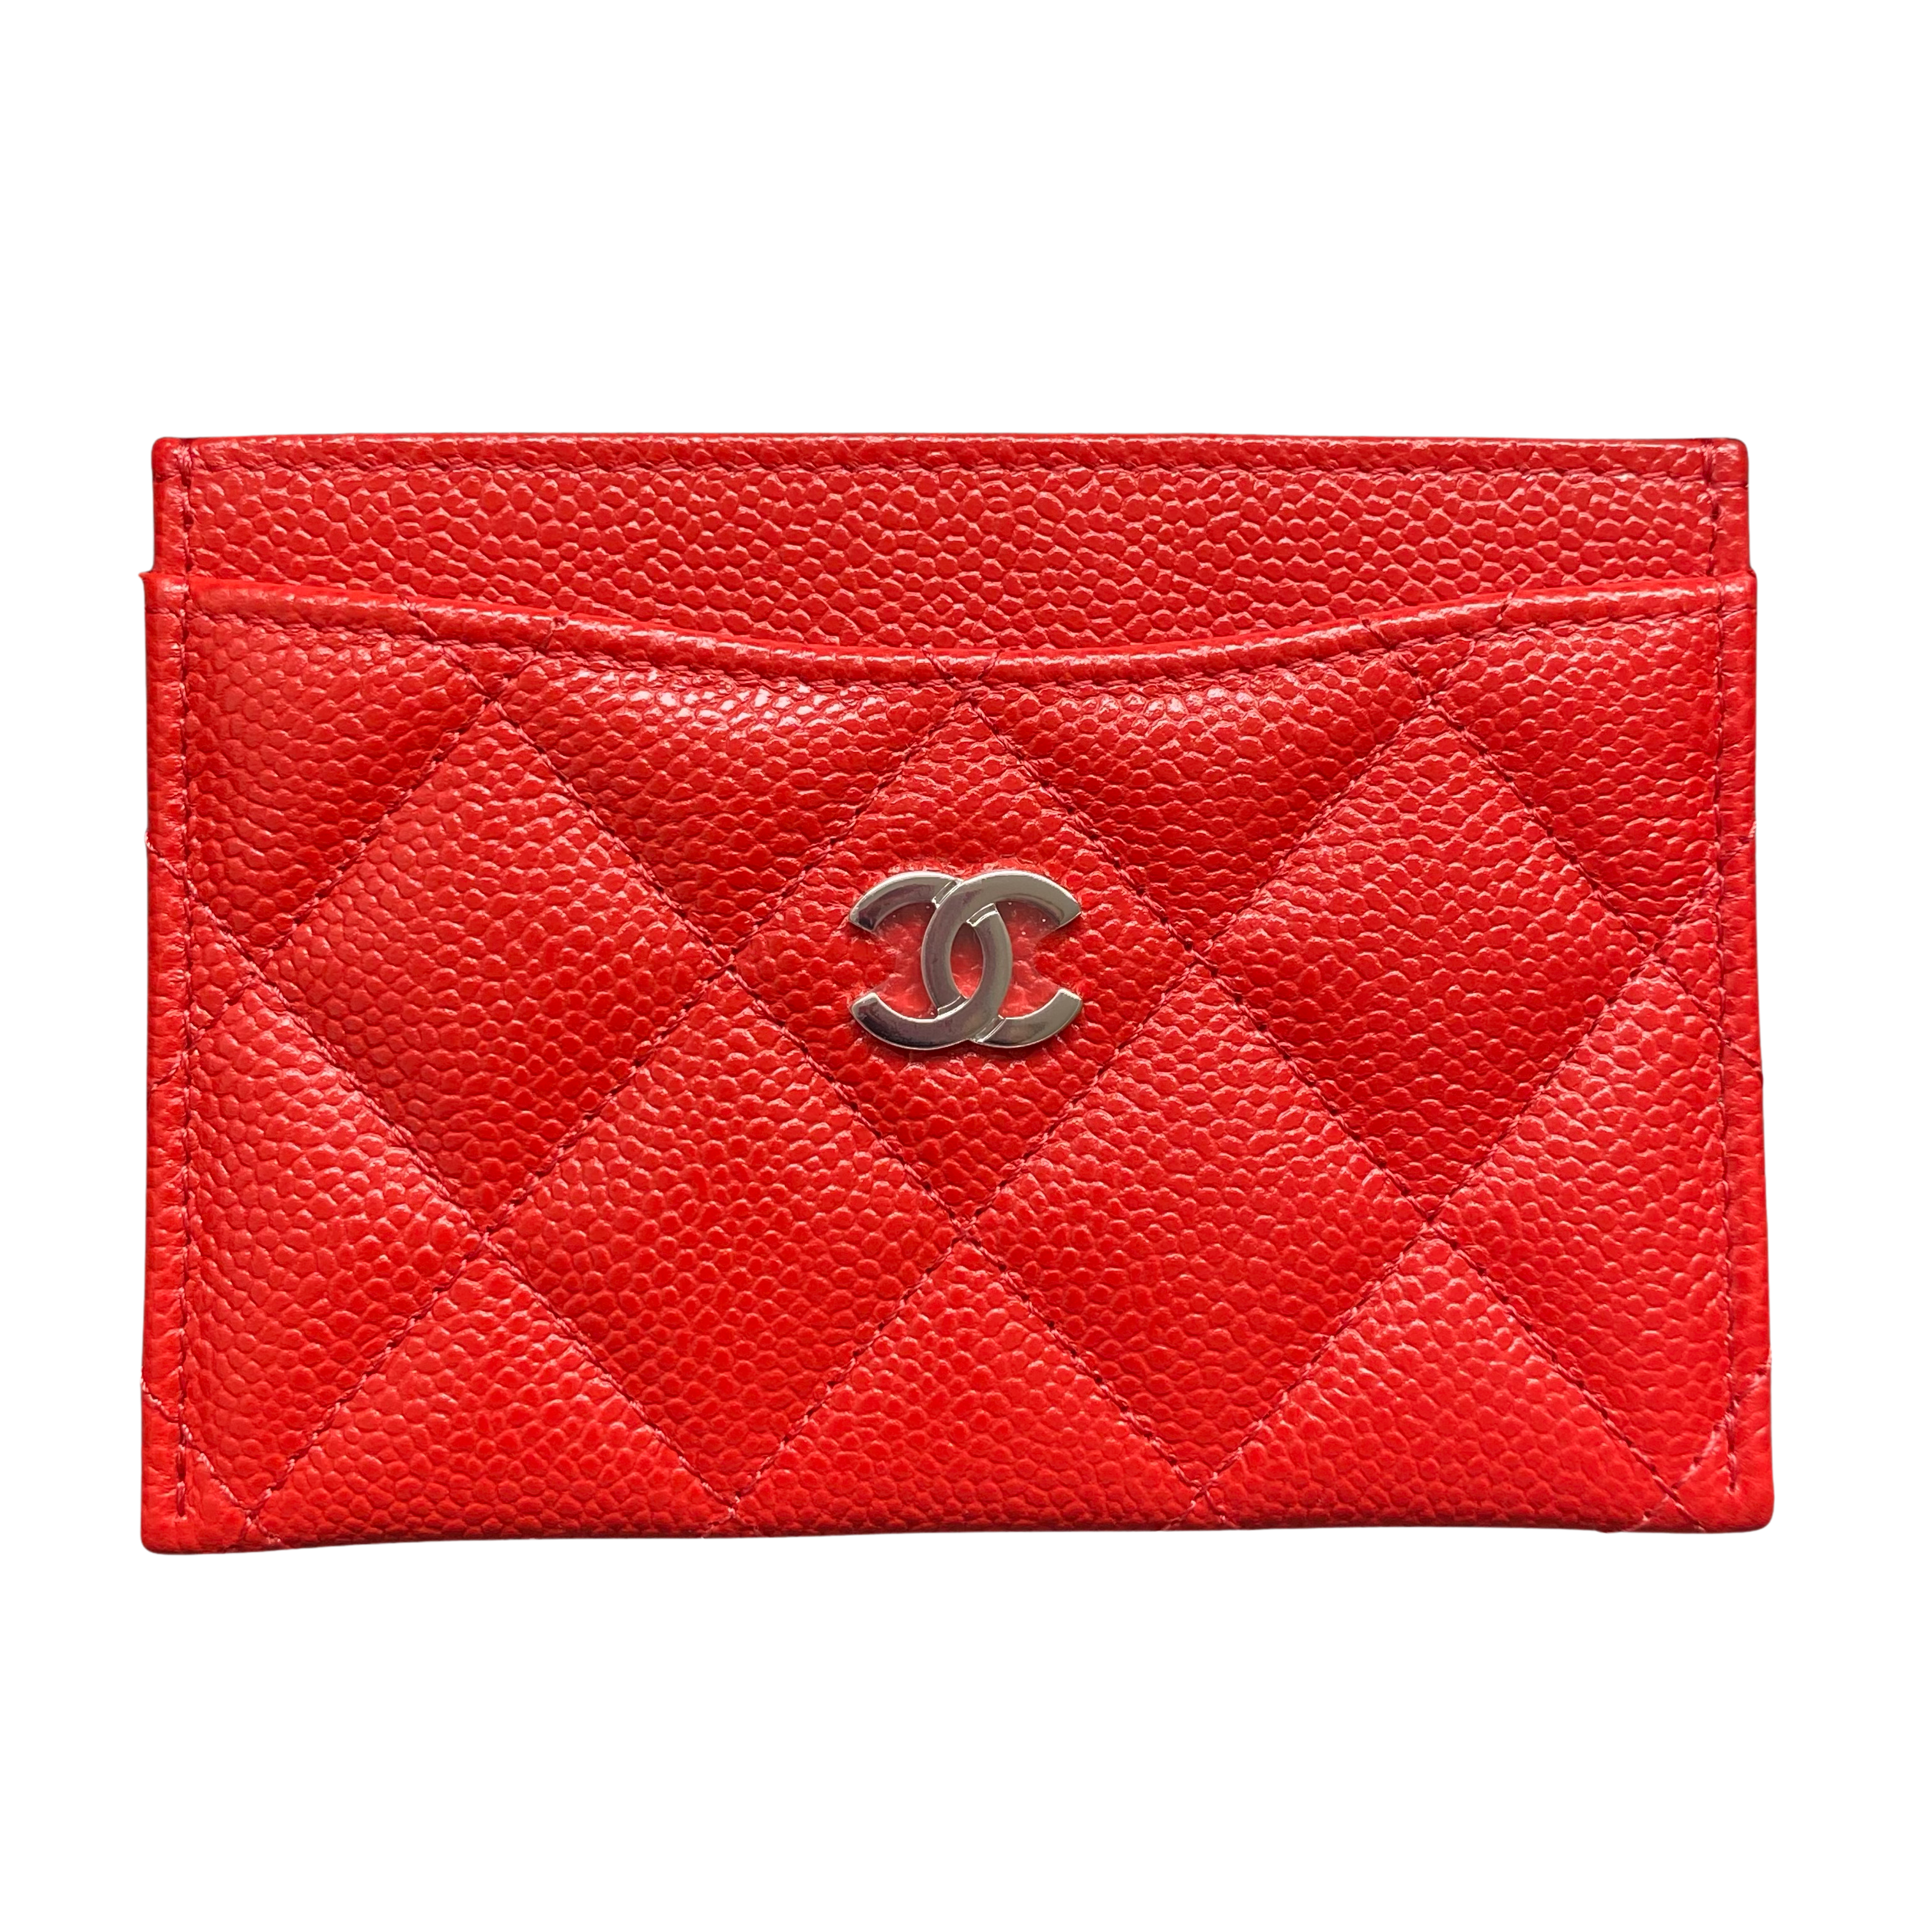 Chanel Classic Card Holder Camellia Caviar Red 1213581